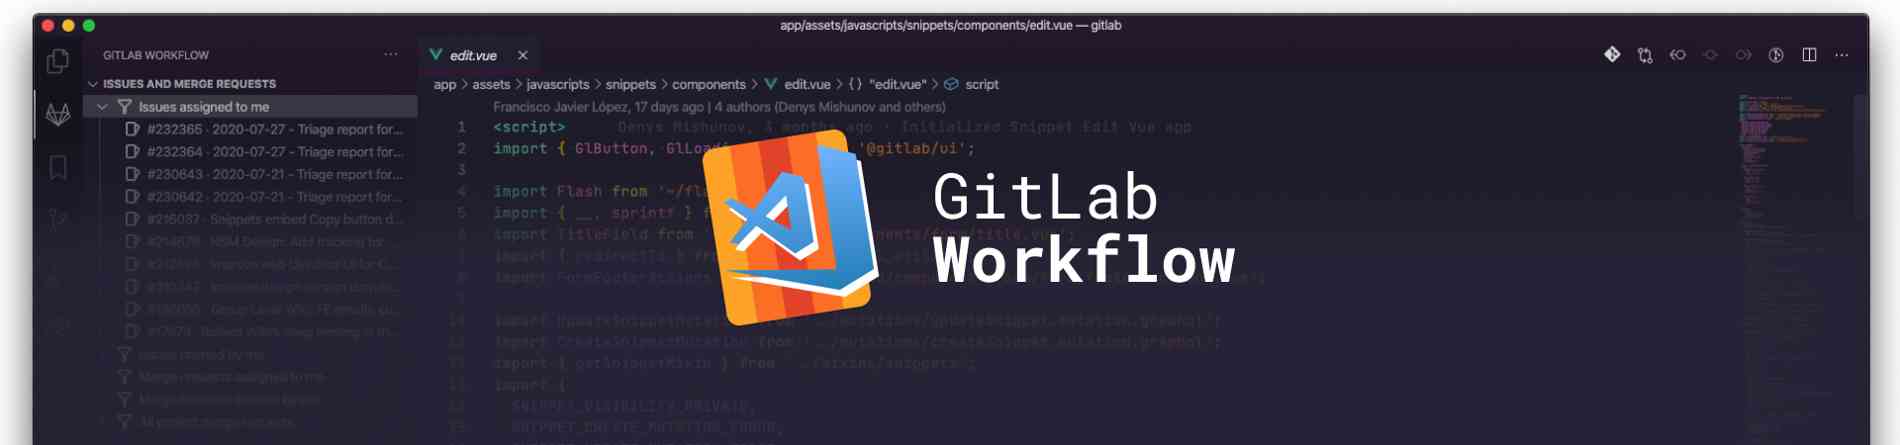 How we created a GitLab Workflow Extension for VS Code